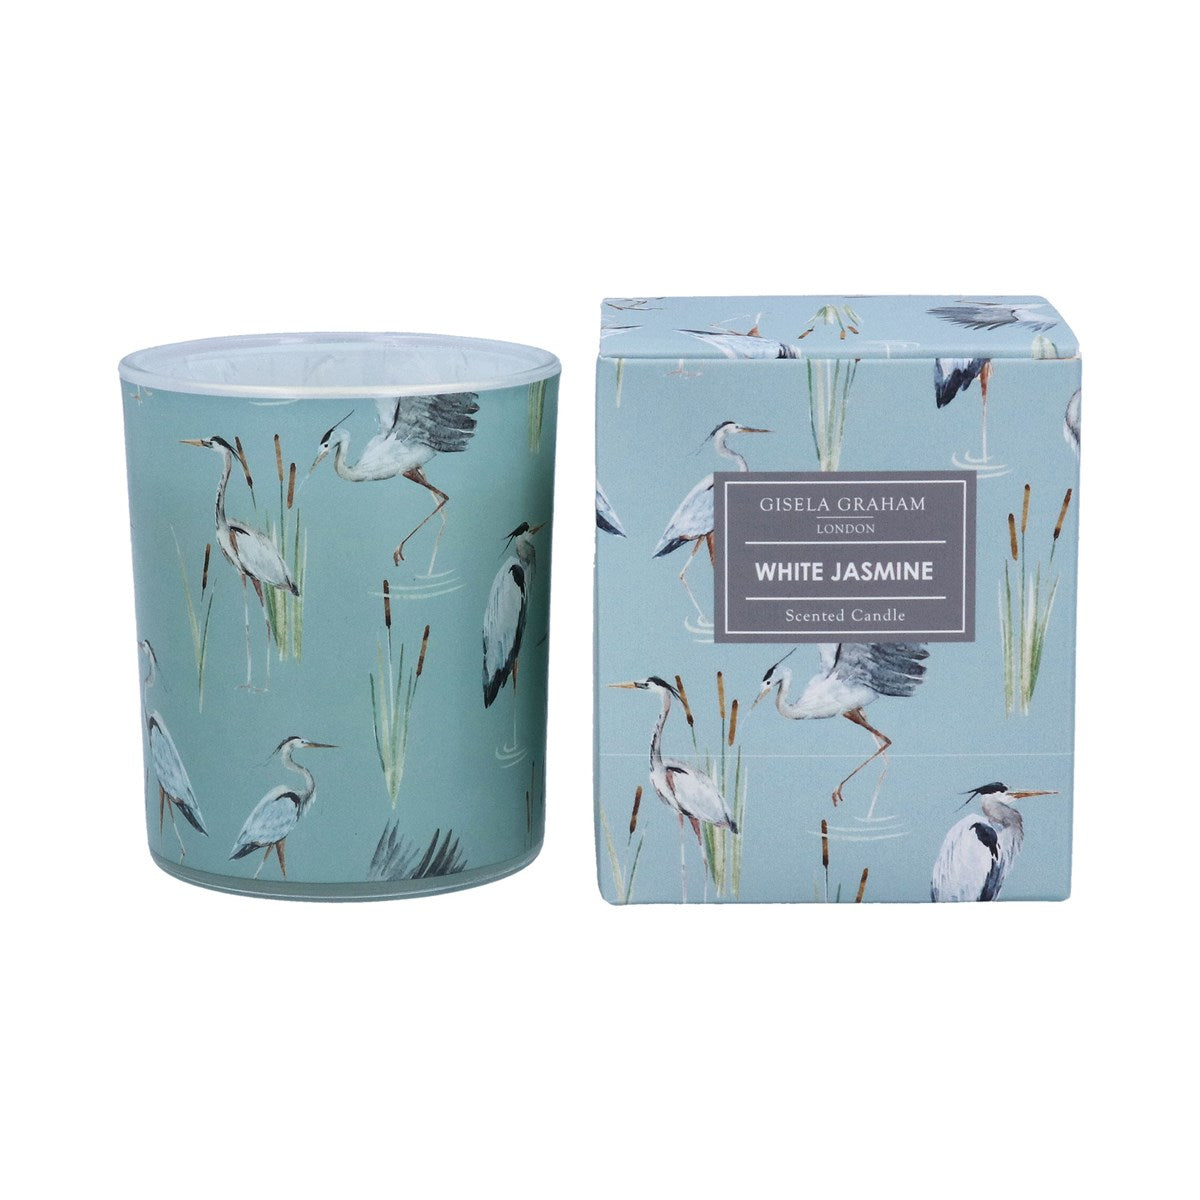 Boxed Candle - Herons